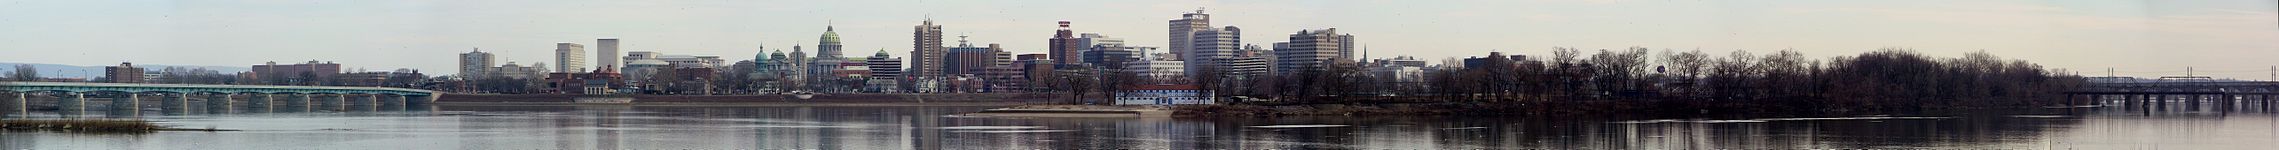 A city skyline, including the Pennsylvania State Capitol, beyond a river with bridges extending across the river on both sides of the photograph. An island is prominent in the right mid-ground.